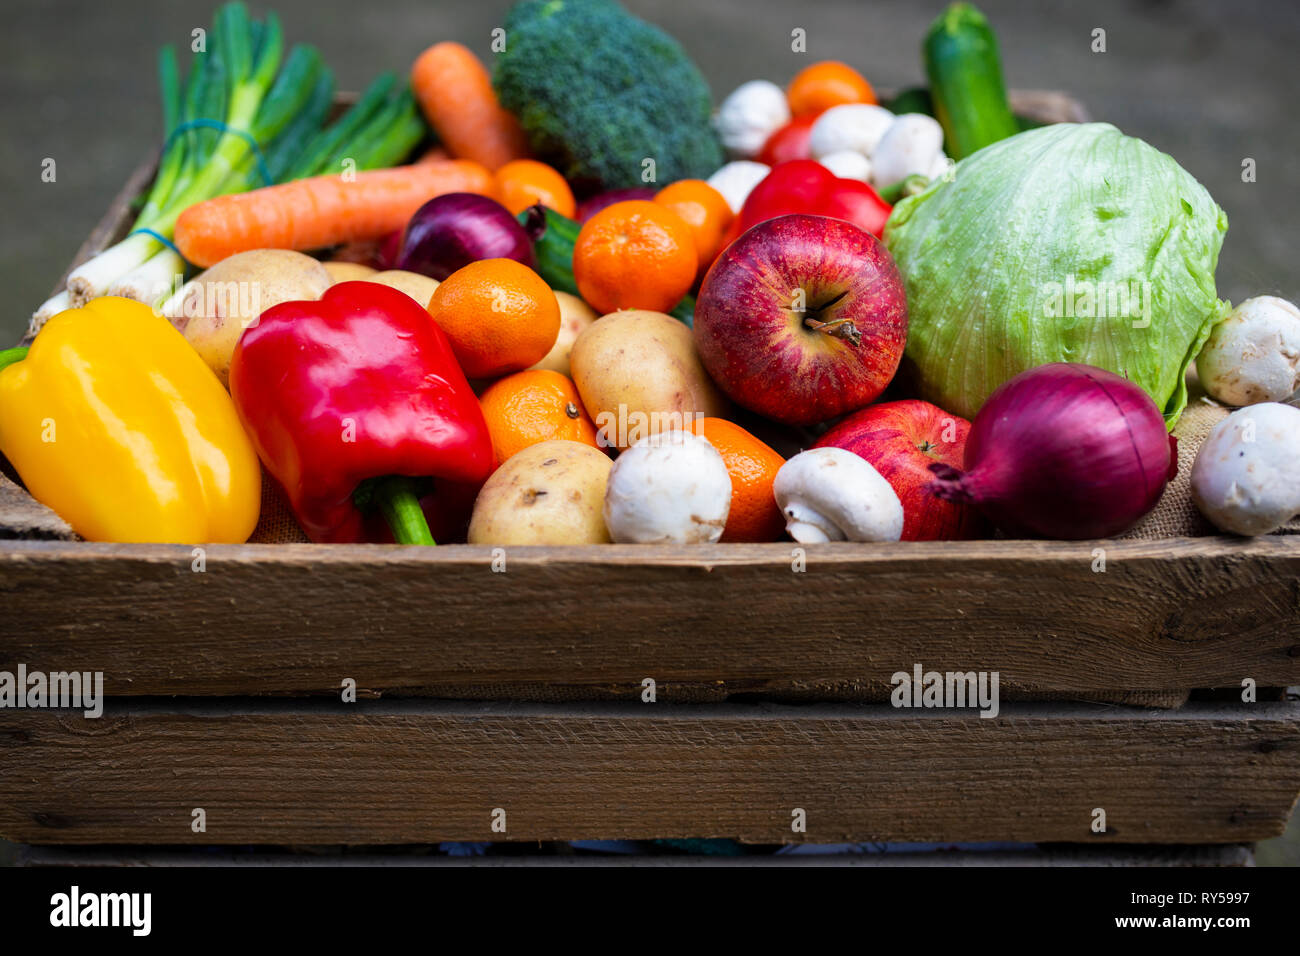 Fruit and vegetables. A vintage wooden crate filled with colourful fresh fruit and vegetables to promote healthy vegan plant based living. Stock Photo